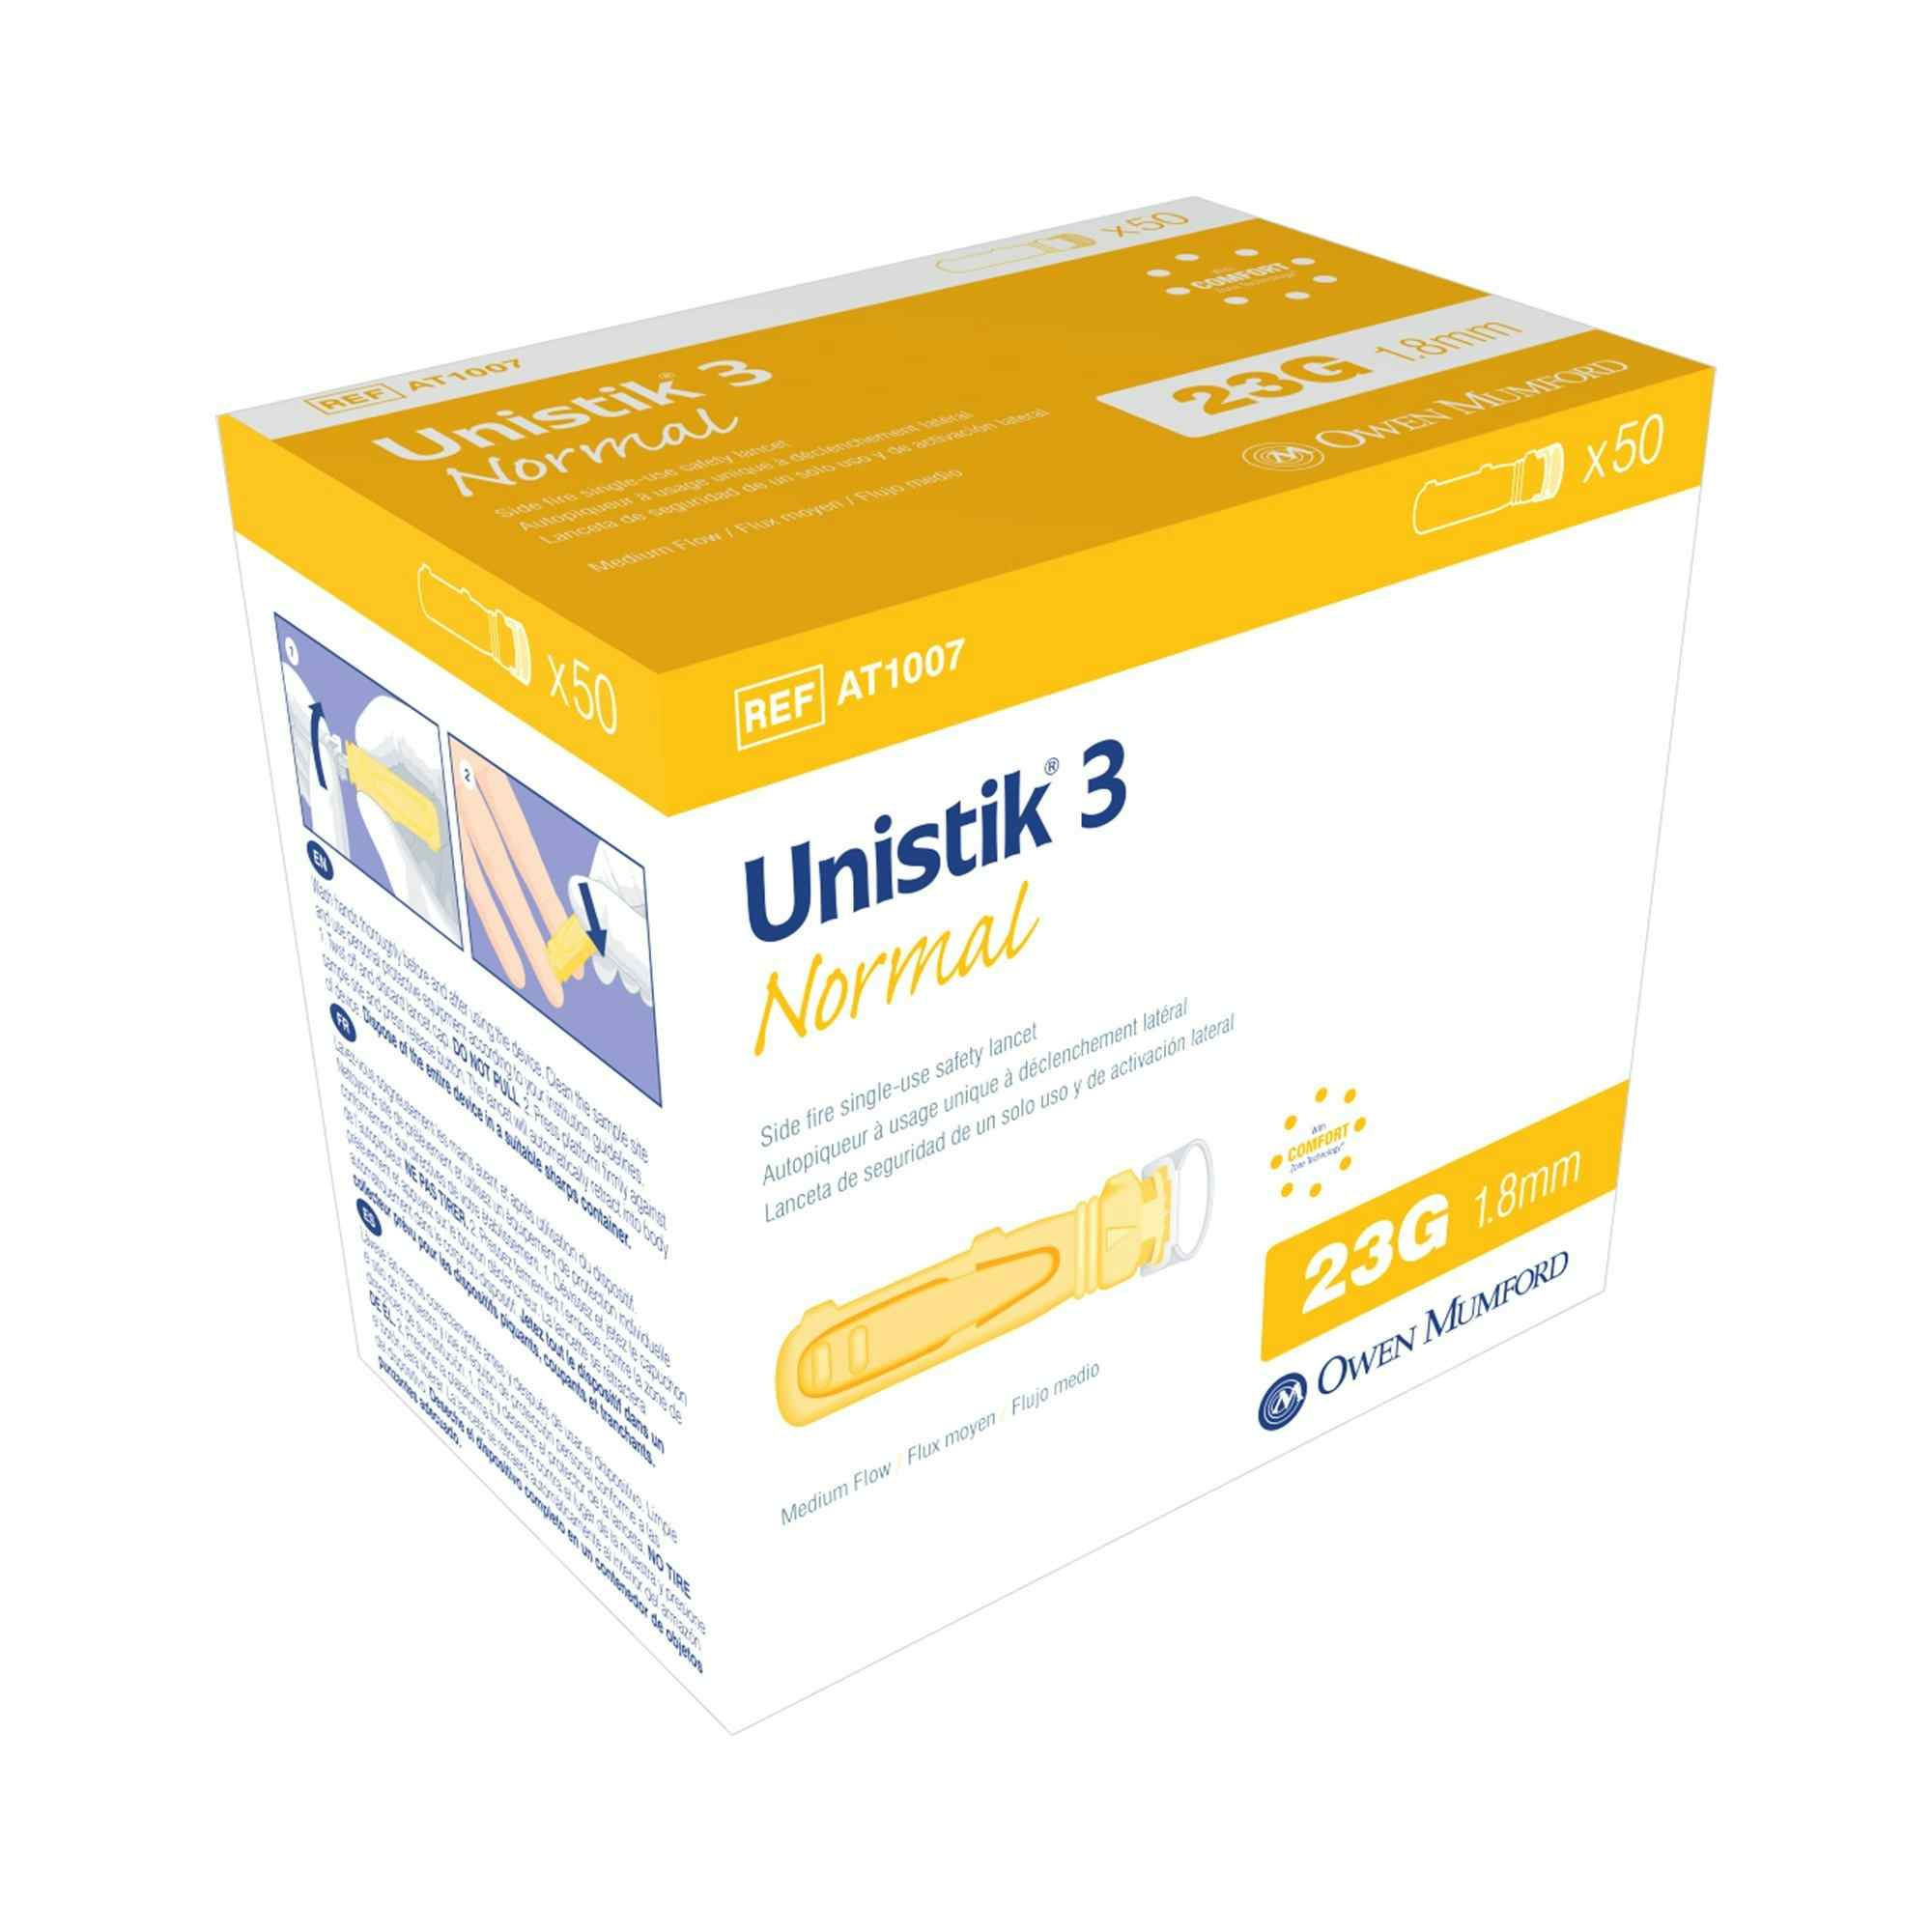 Unistik 3 Normal Safety Lancet, Push Button Side Activation, 23g, AT-1007, Box of 50